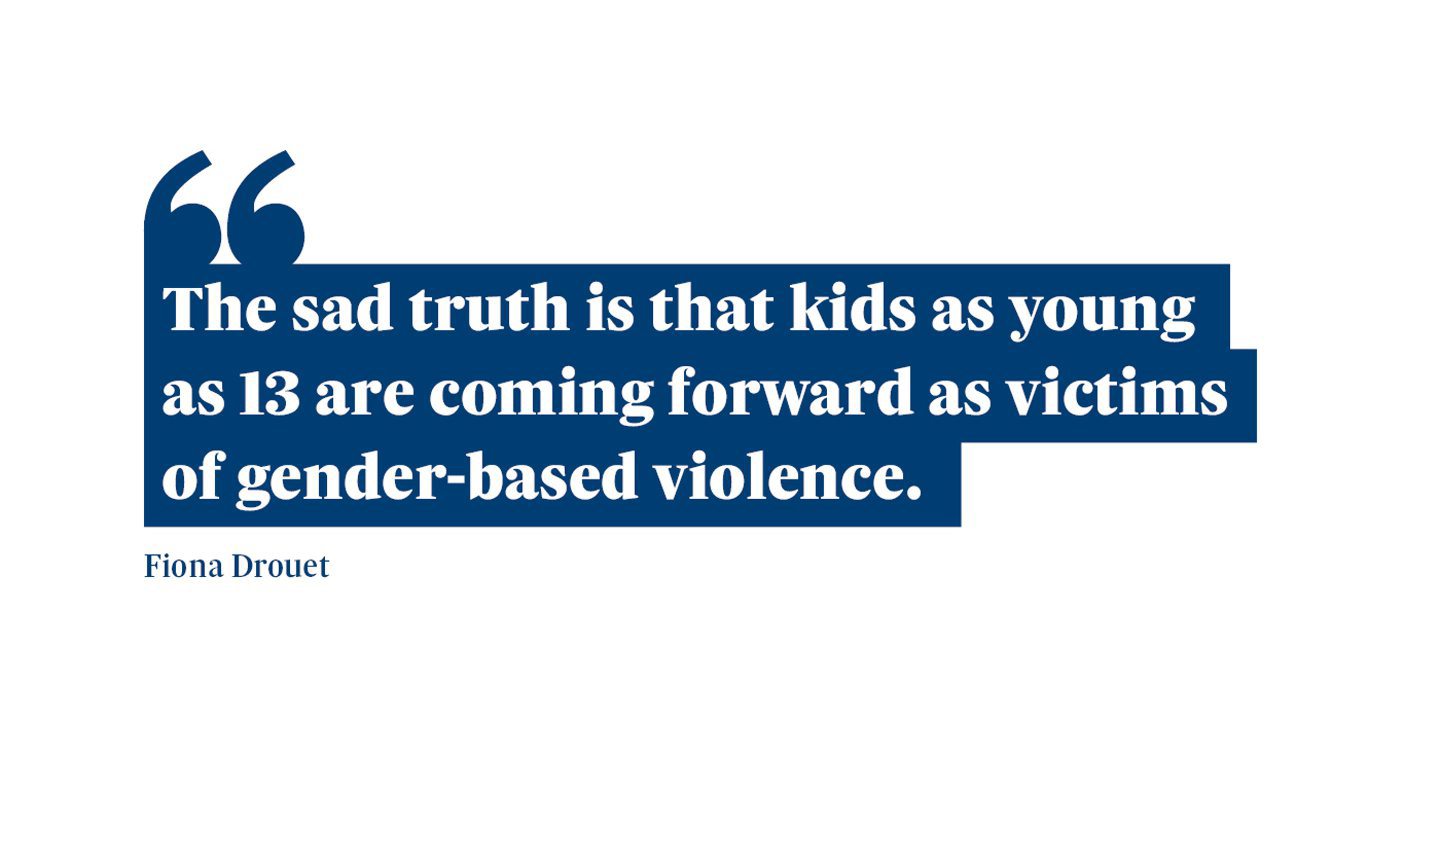 A quote from Fiona Drouet which says: “The sad truth is that kids as young as 13 are coming forward as victims of gender-based violence.”